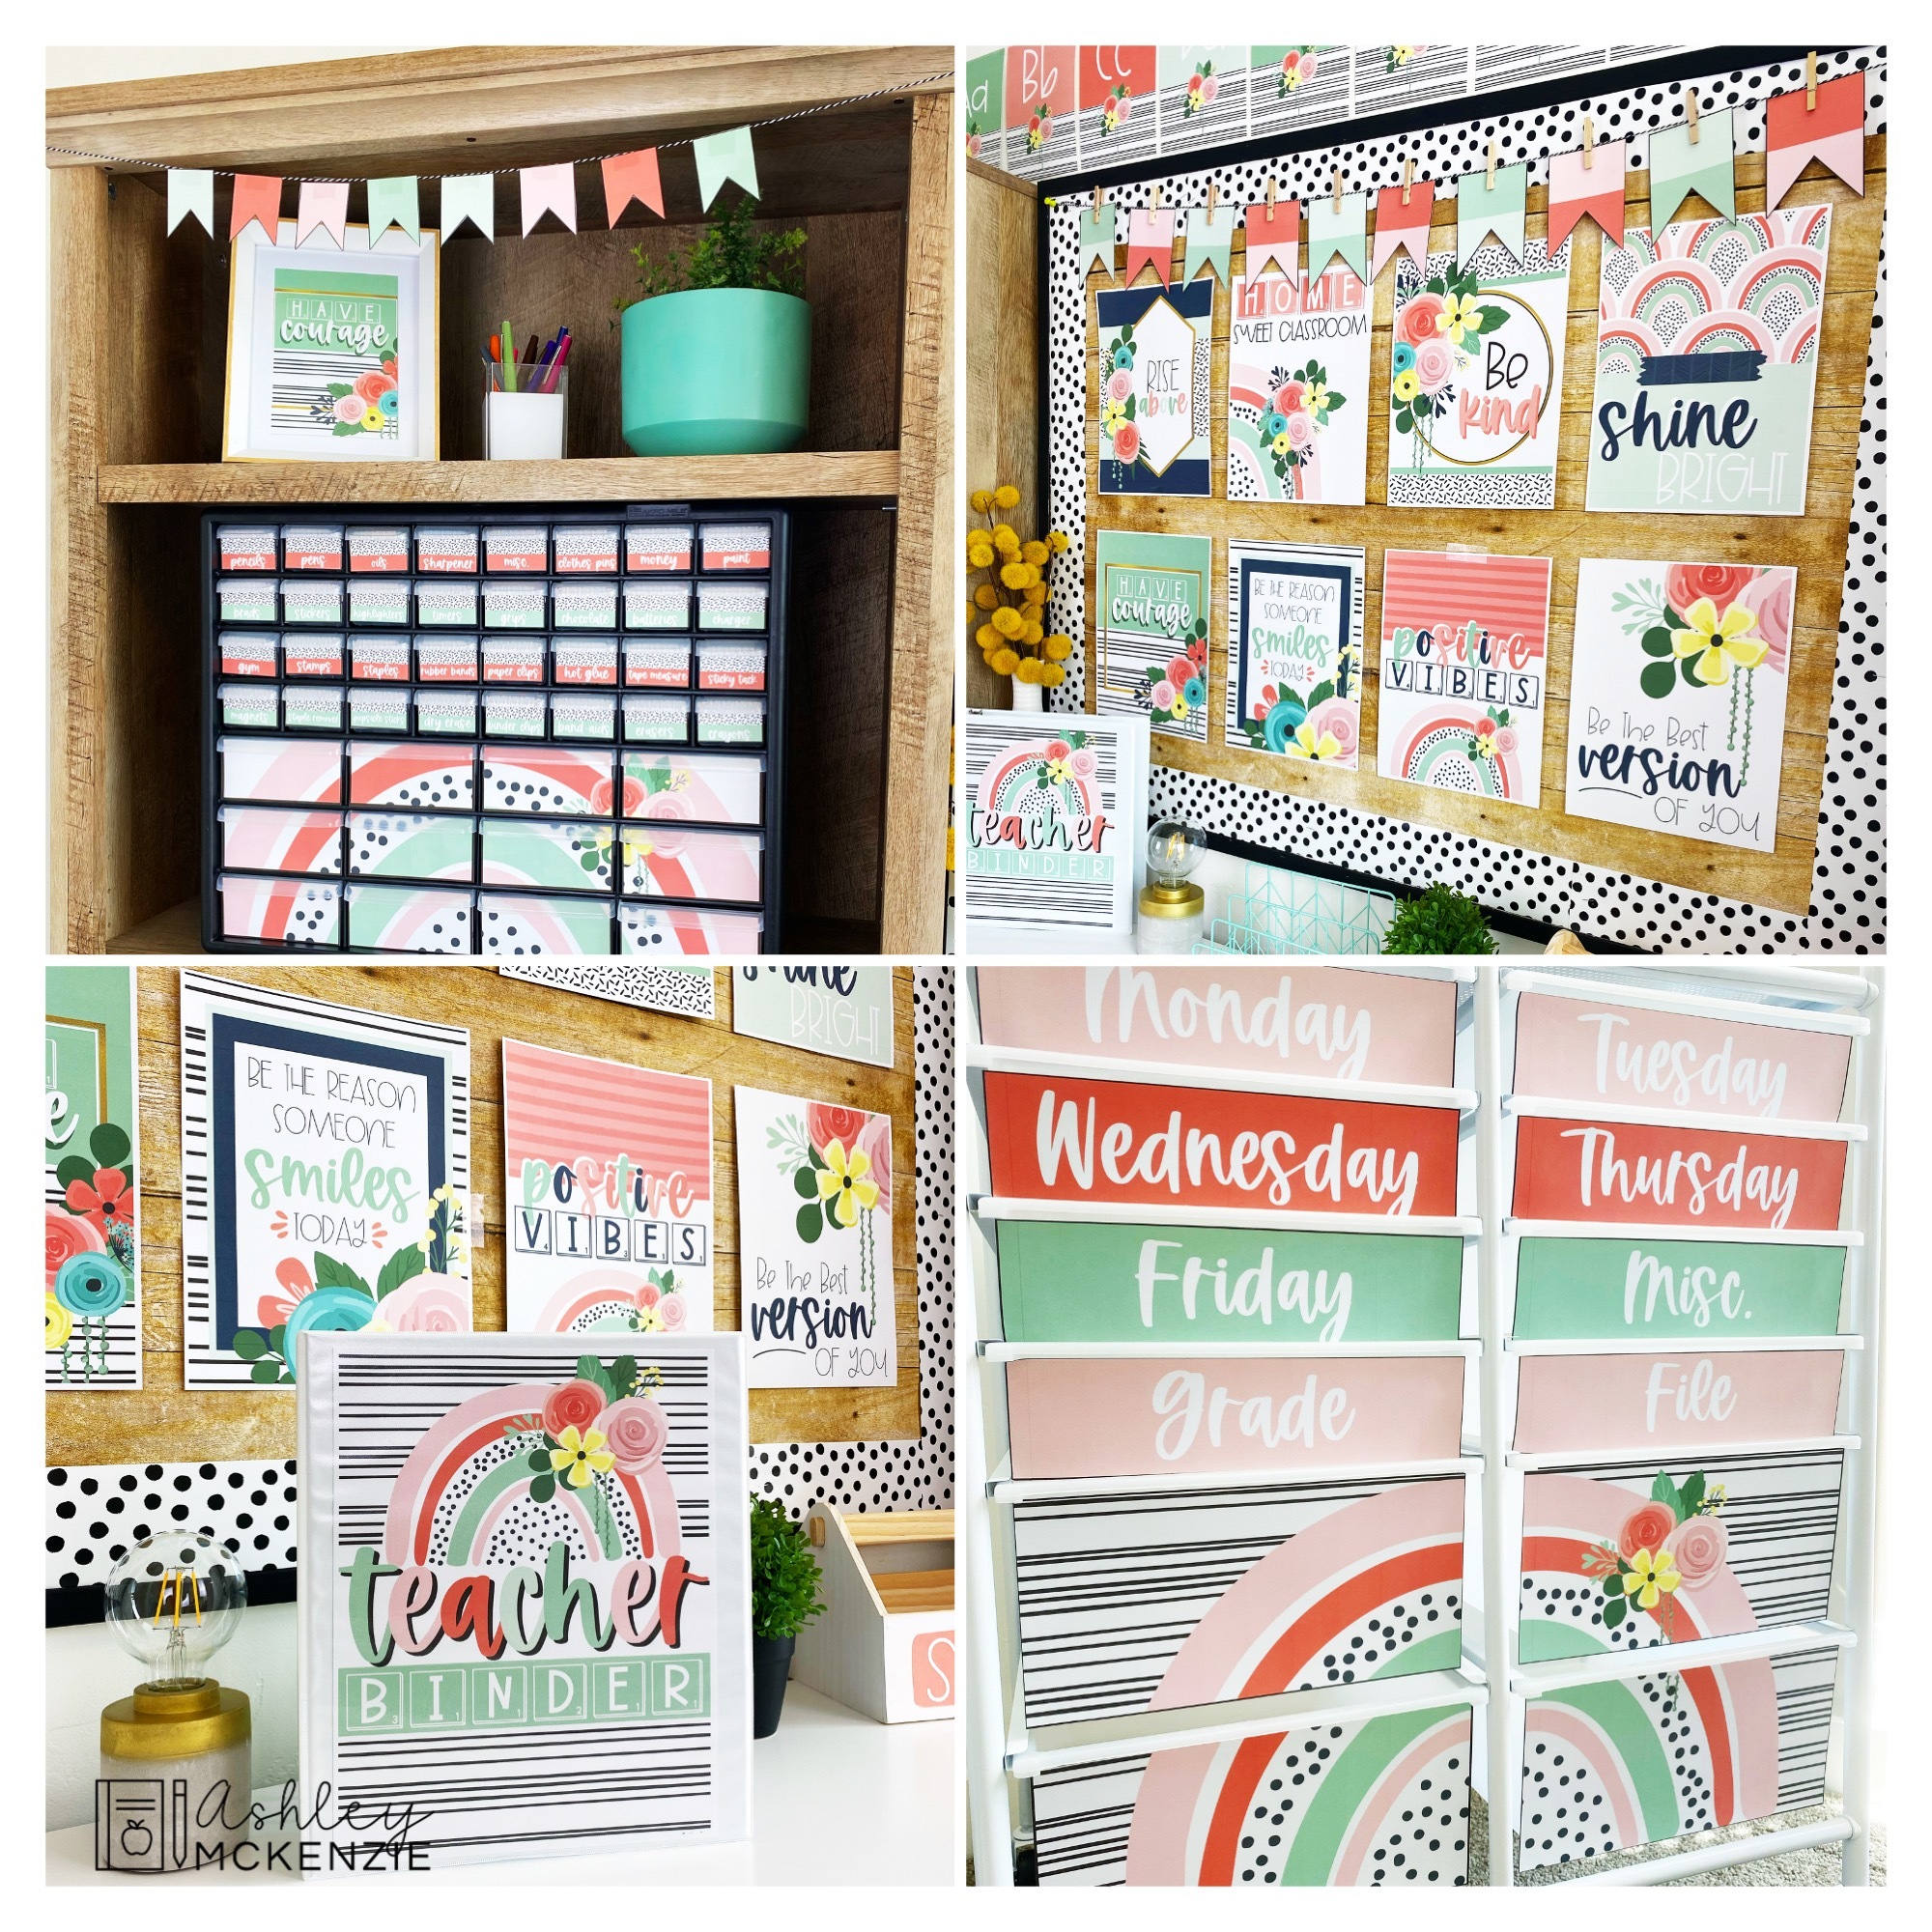 Classroom Name Tags for Bulletin Board, Door Display & Desk Name Tags  EDITABLE Version Included Digital Download BOHO BRIGHTS 